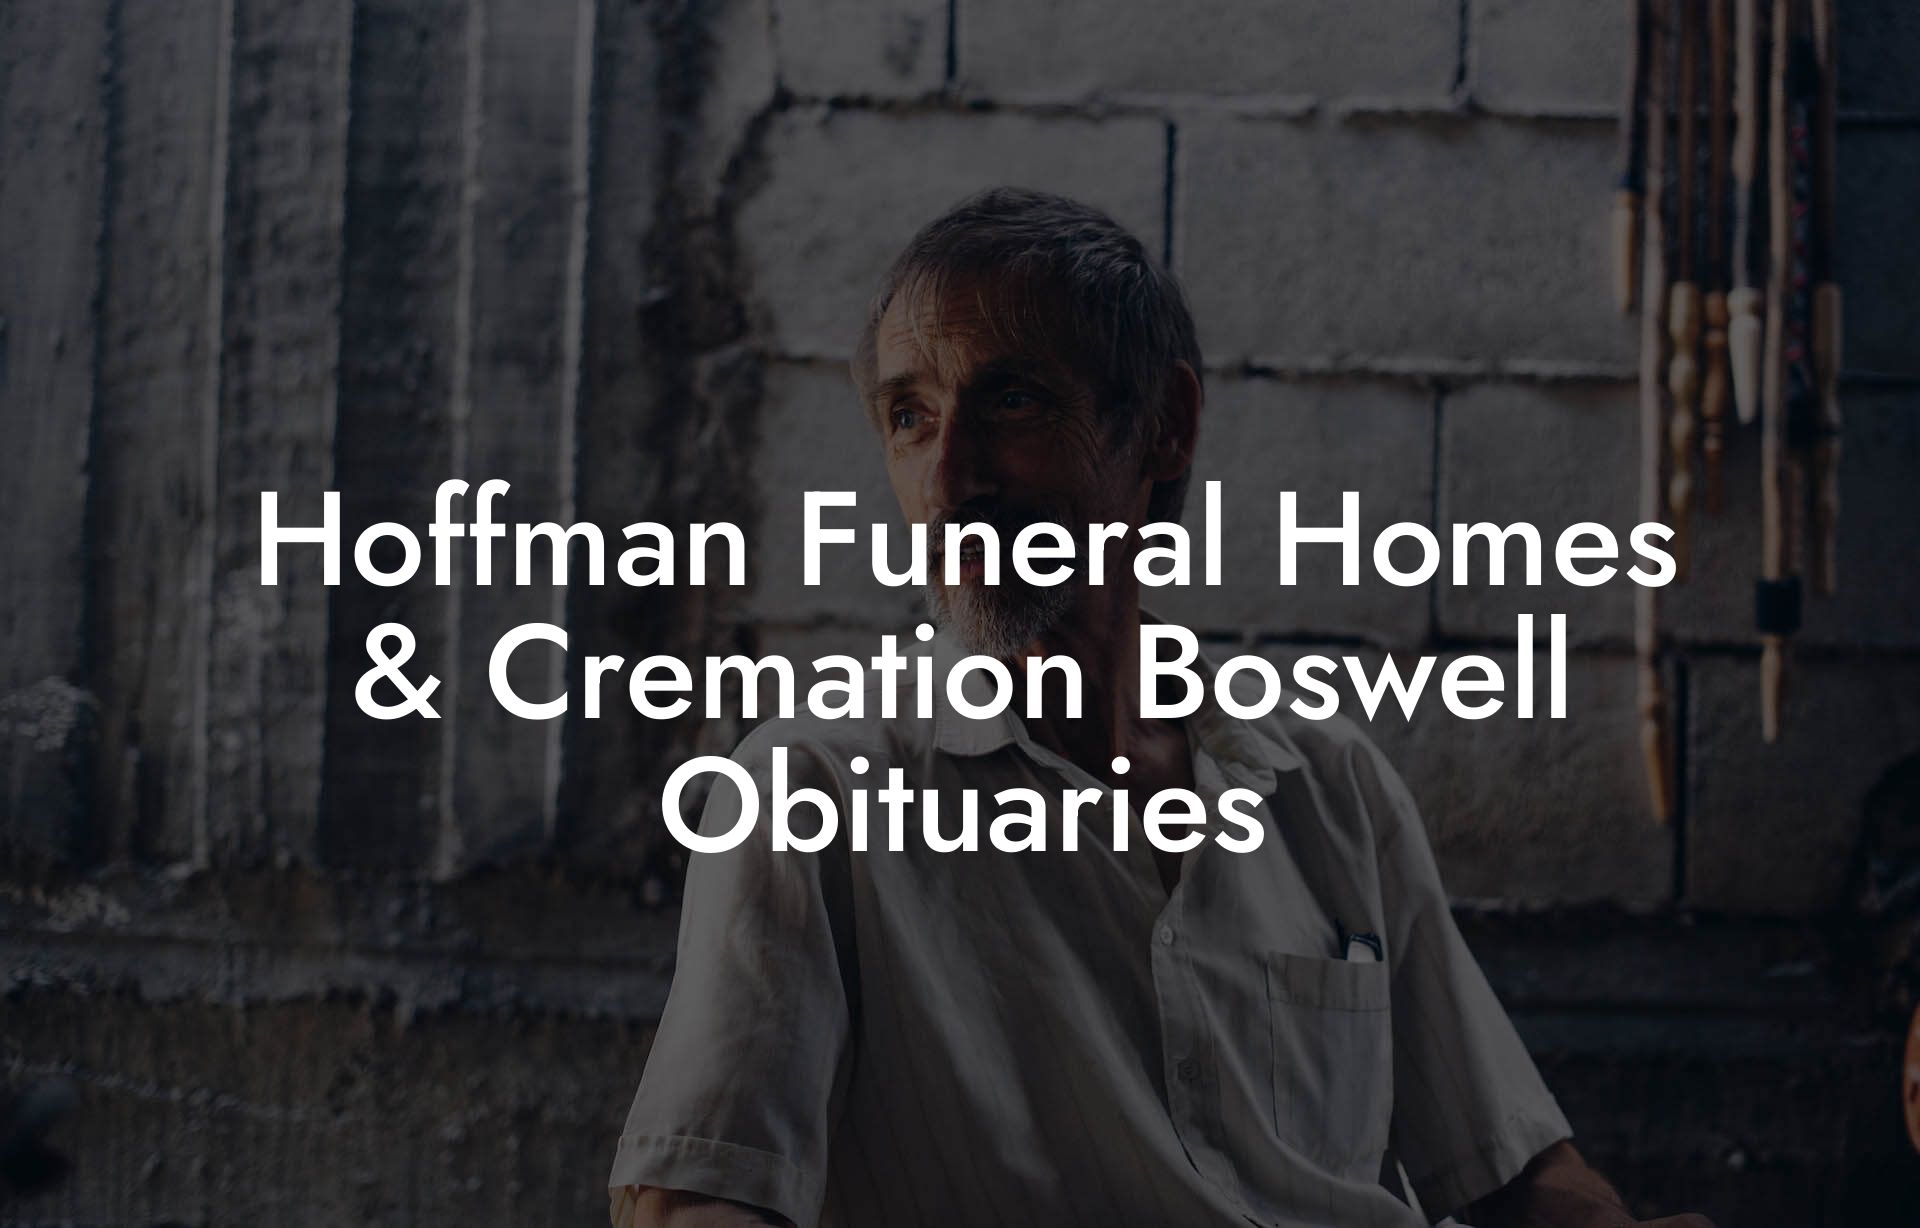 Hoffman Funeral Homes & Cremation Boswell Obituaries - Eulogy Assistant